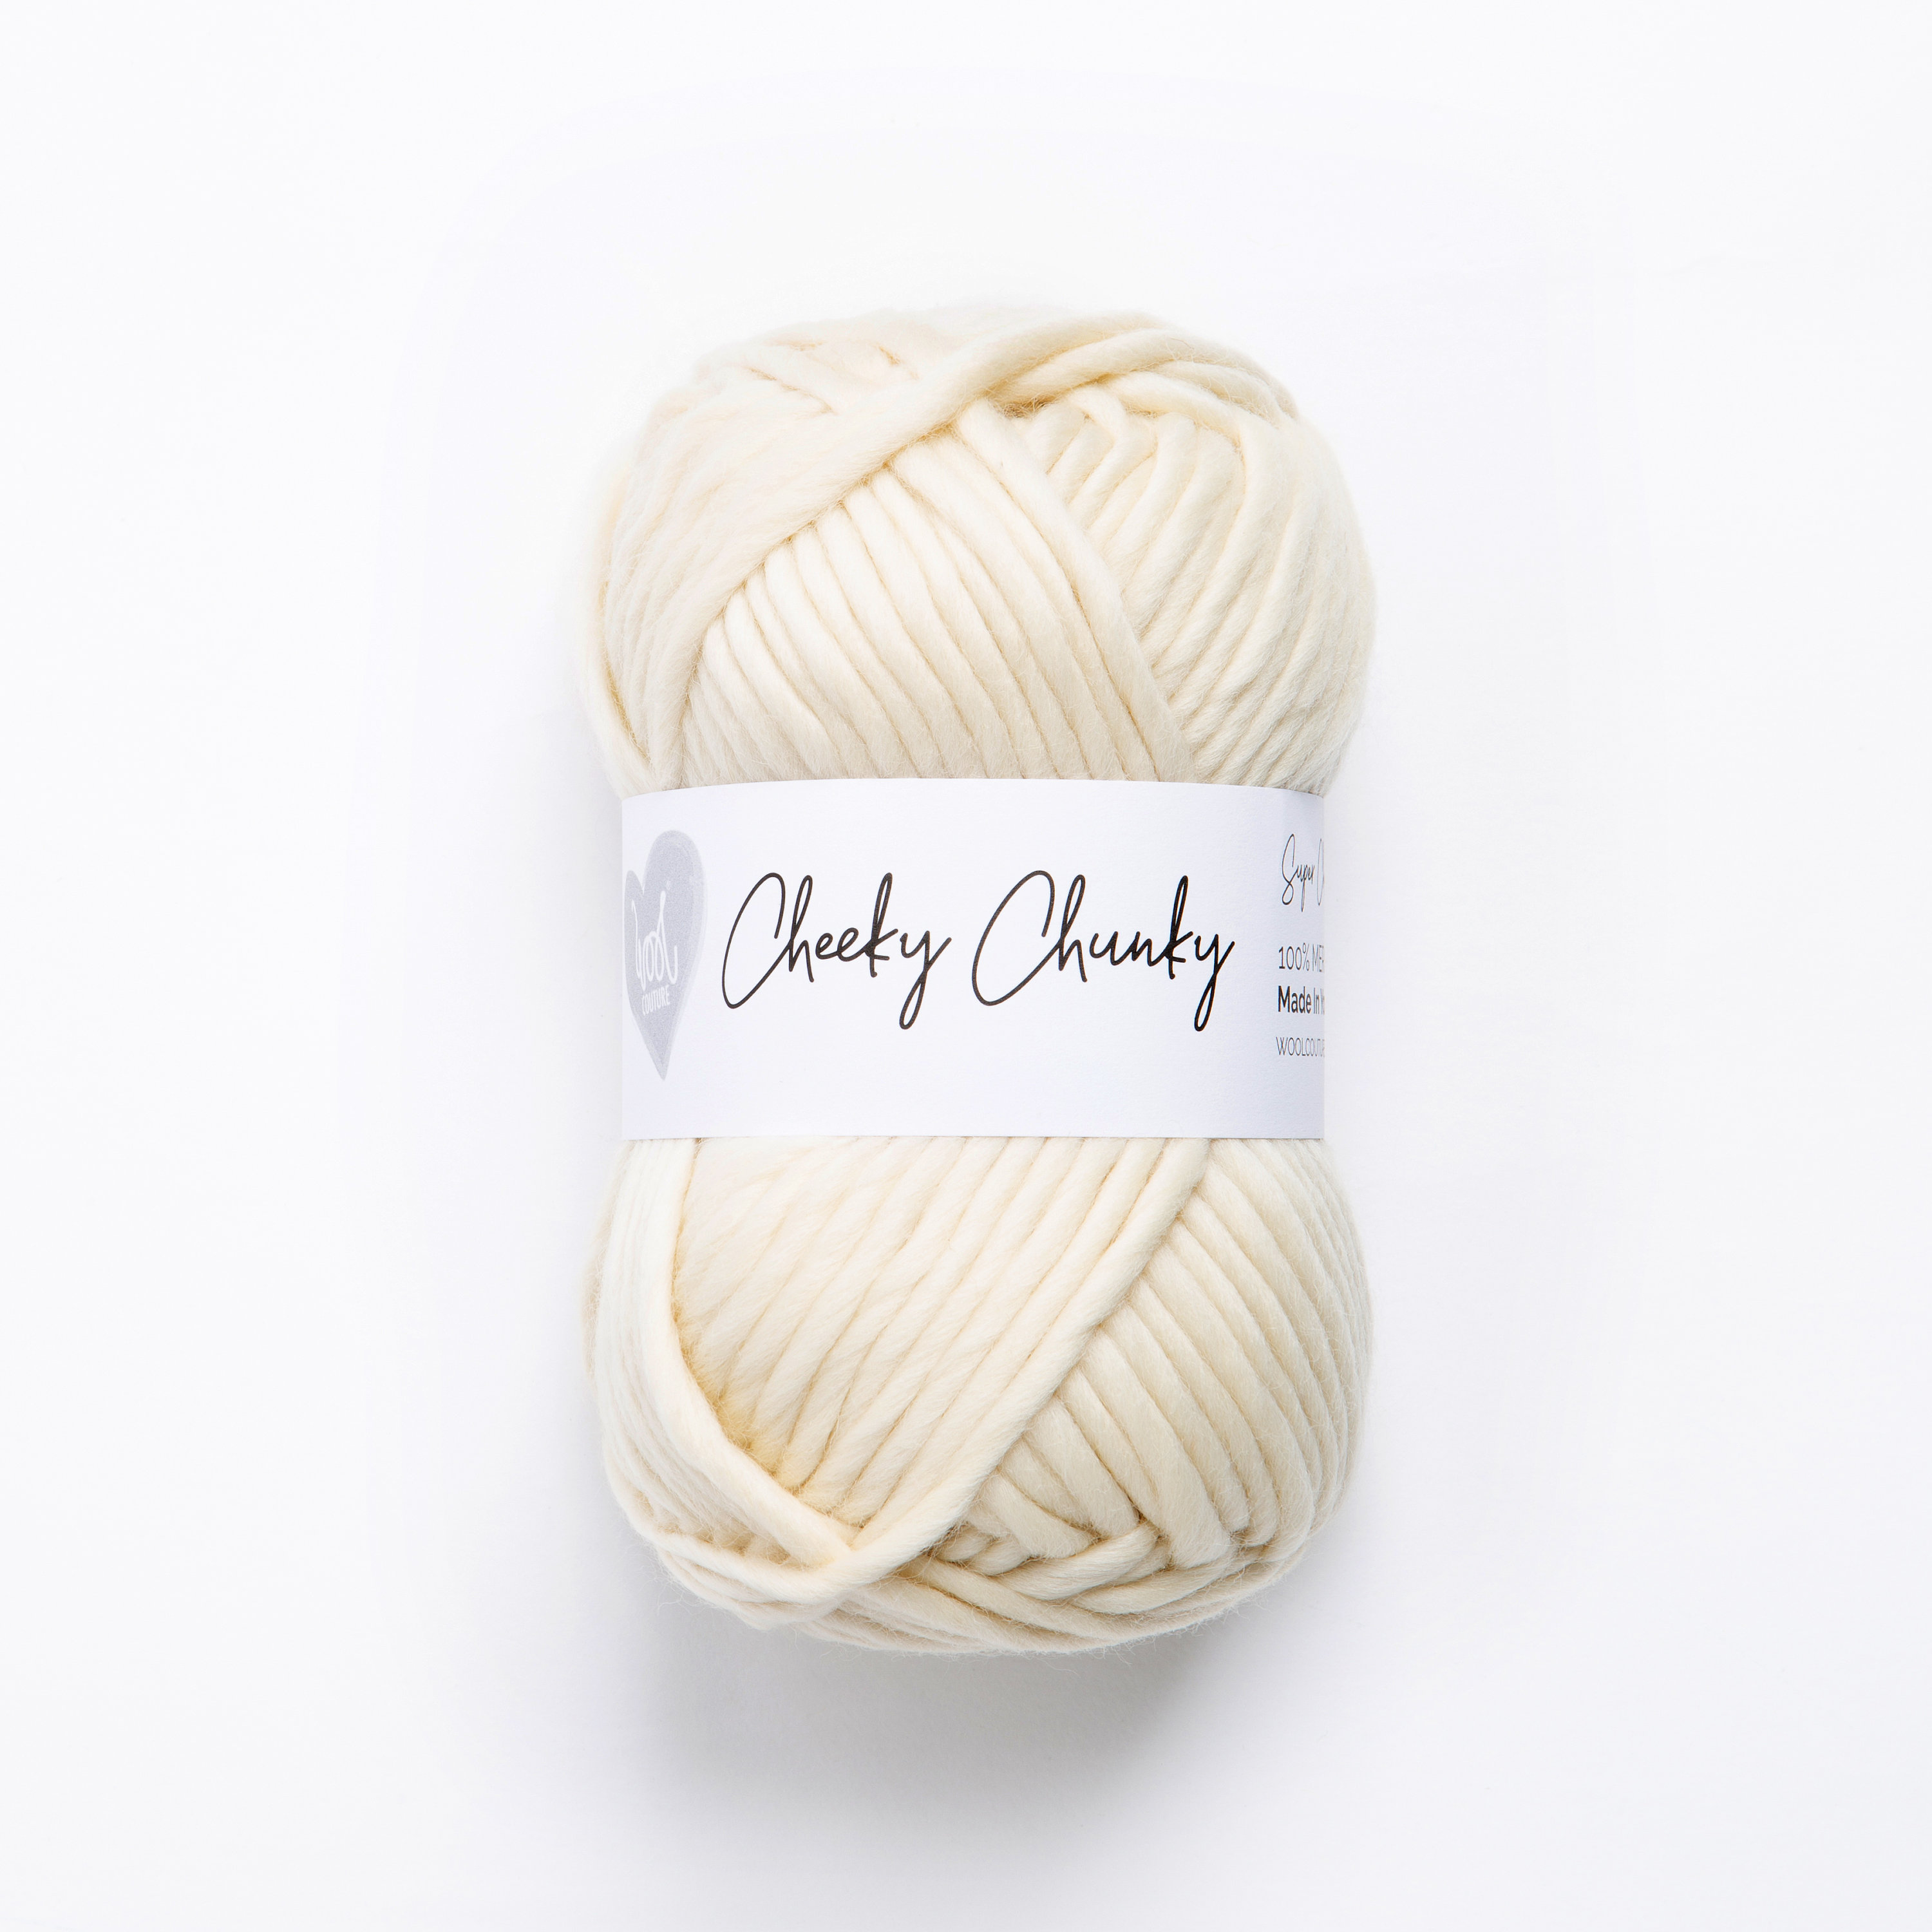 Wool Couture Cheeky Chunky Natural Cream 100g (3.5oz) 100% Wool